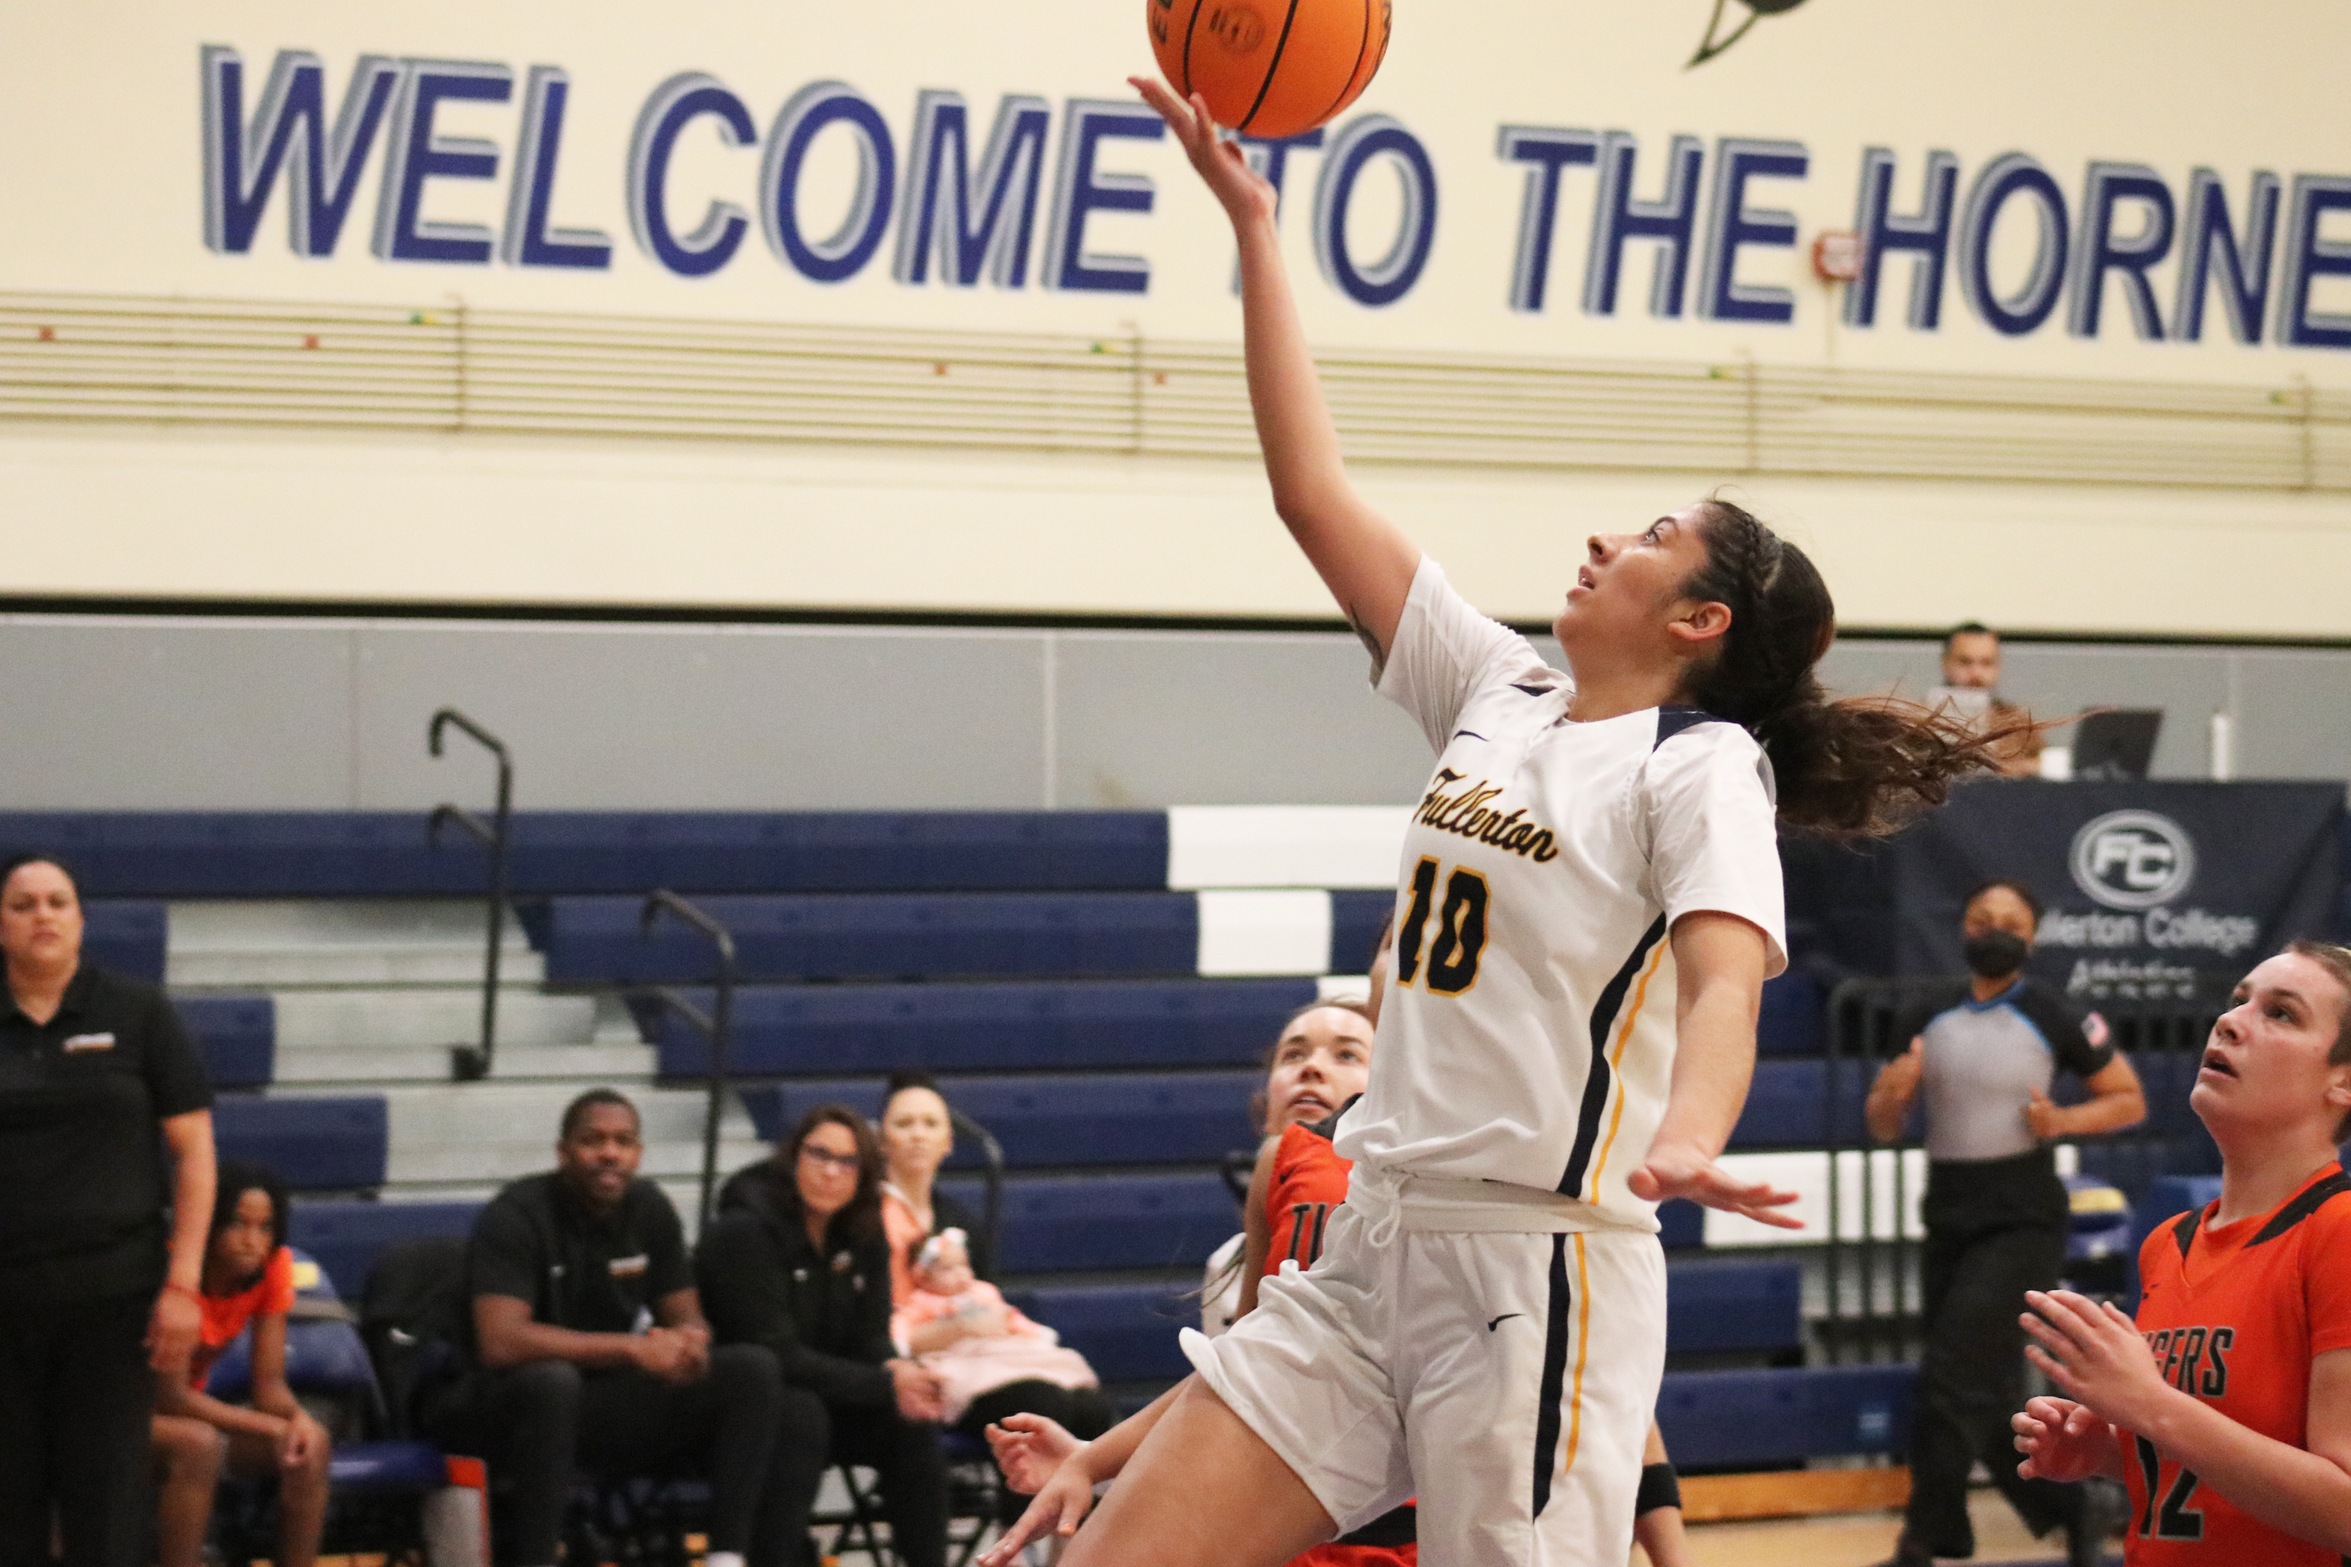 Angela Zendejas led the Hornets in scoring with 18 points.